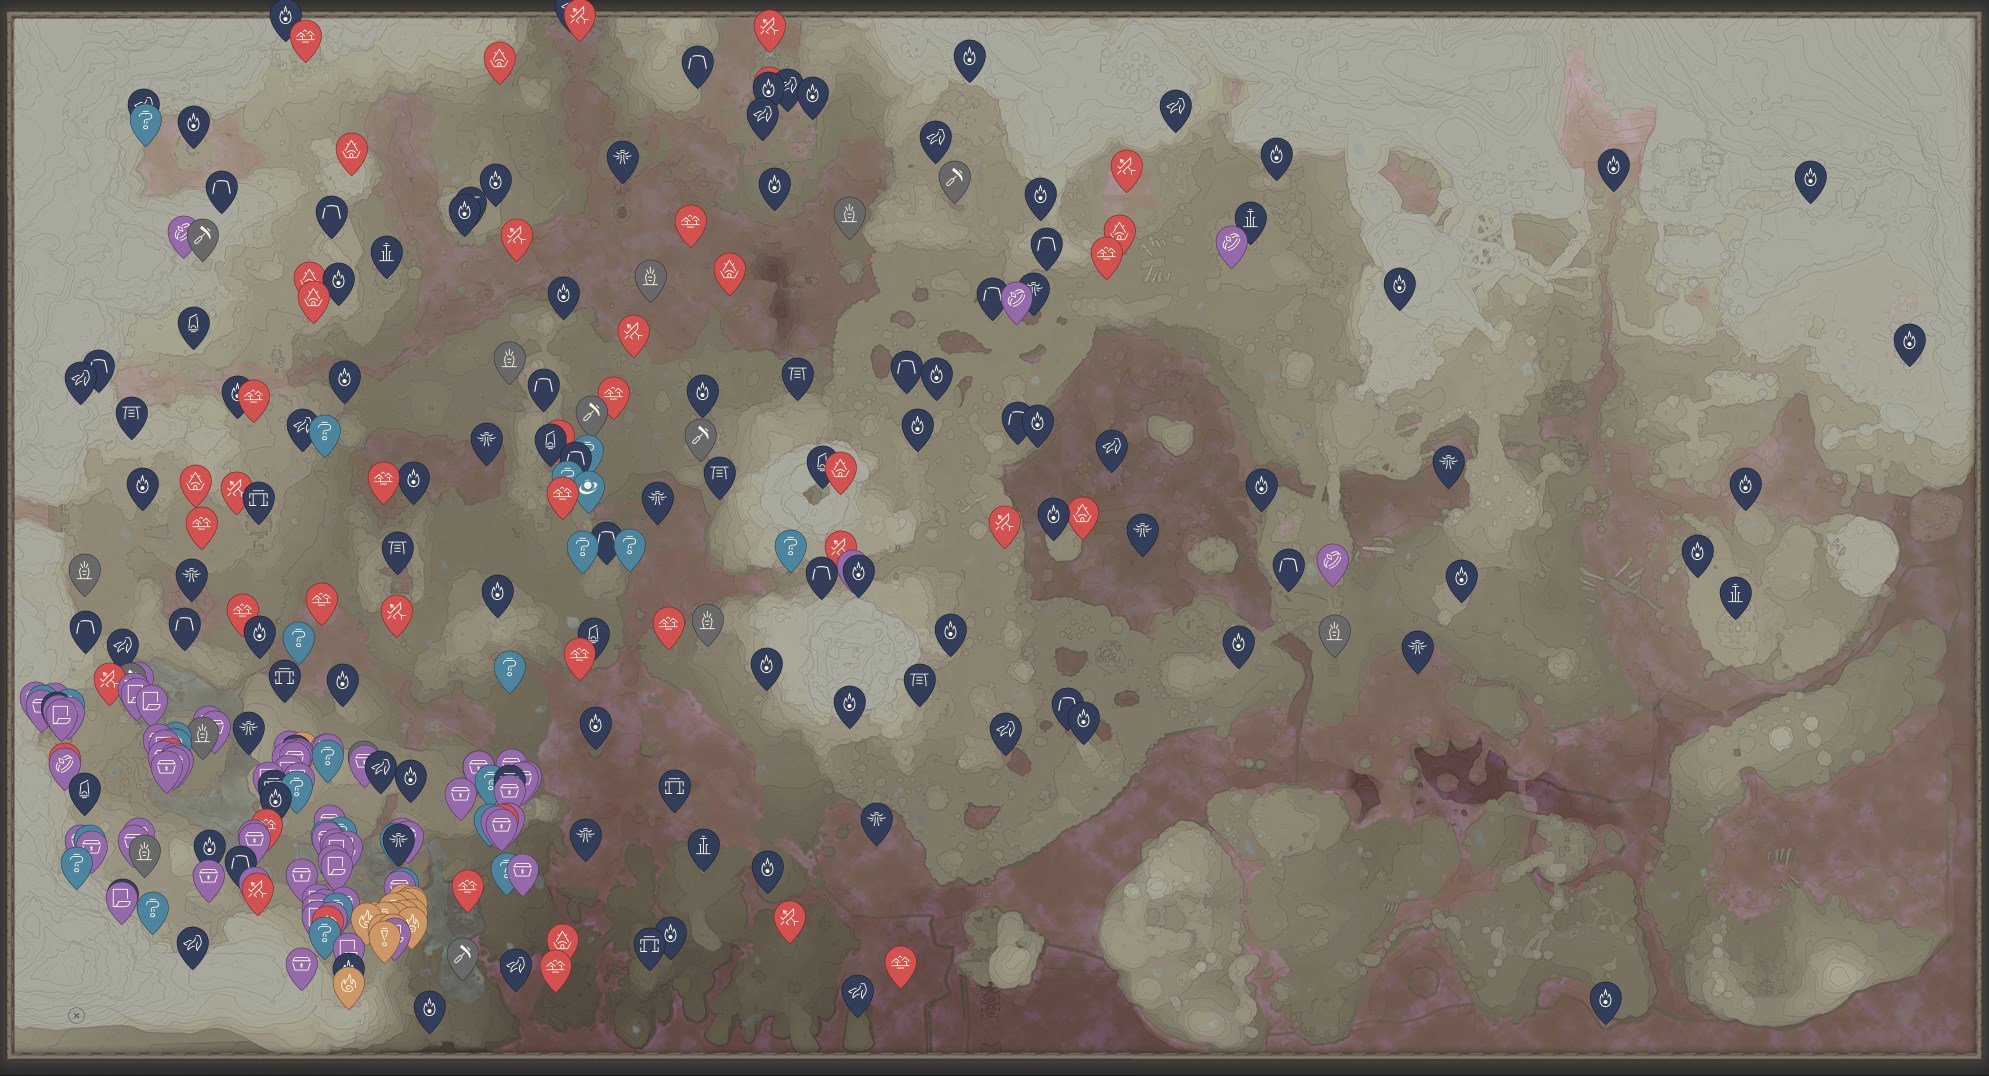 Interactive enshrouded map, where can you find a map with all the points of interest